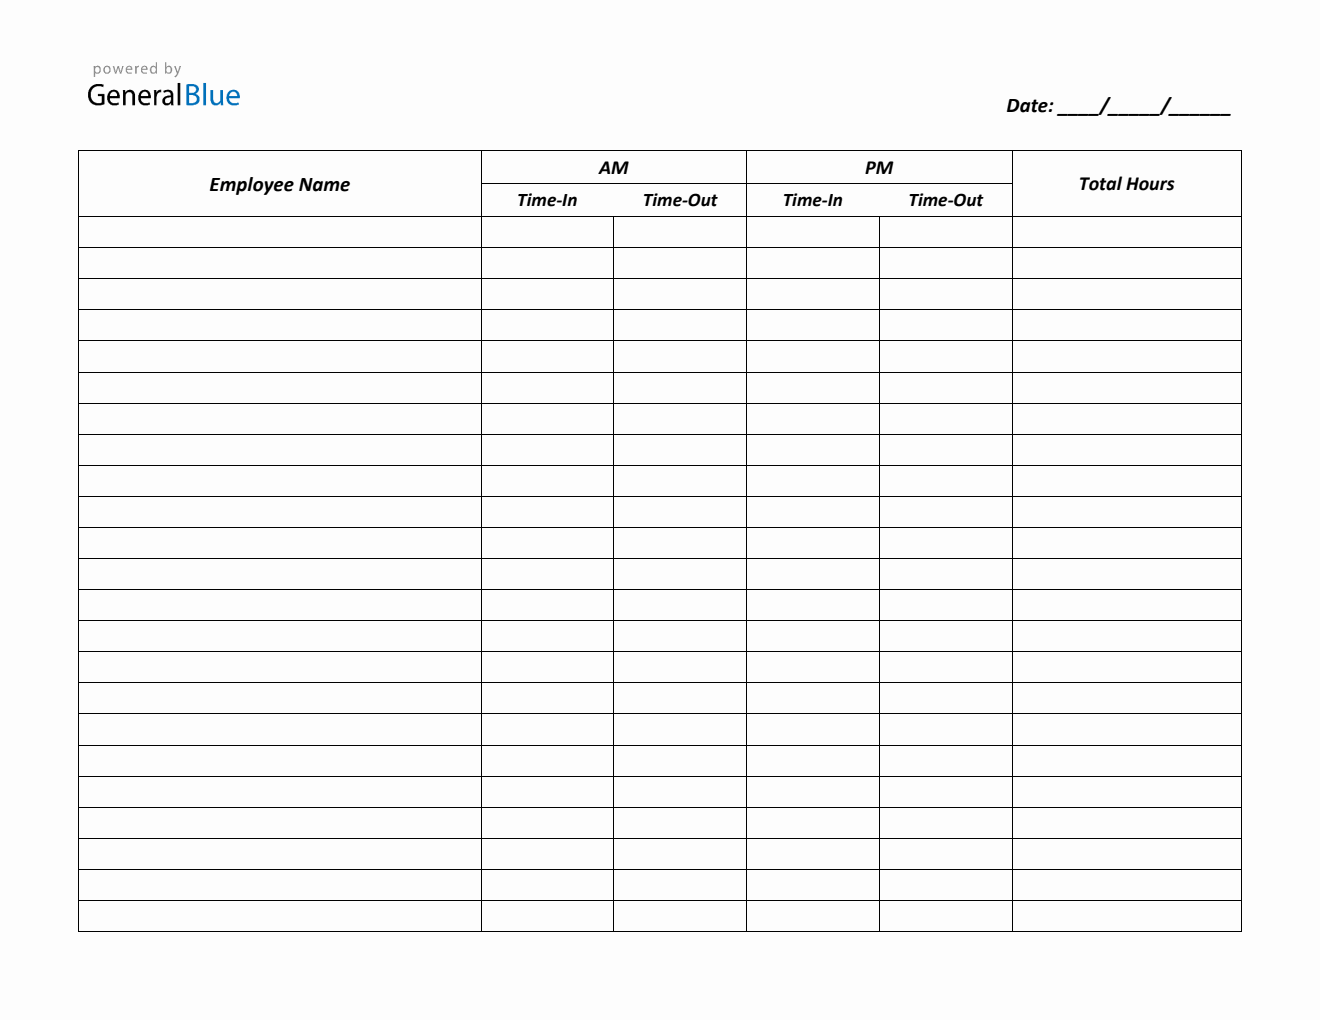 Printable Time-in and Time-Out Timesheet (Word, Letter)